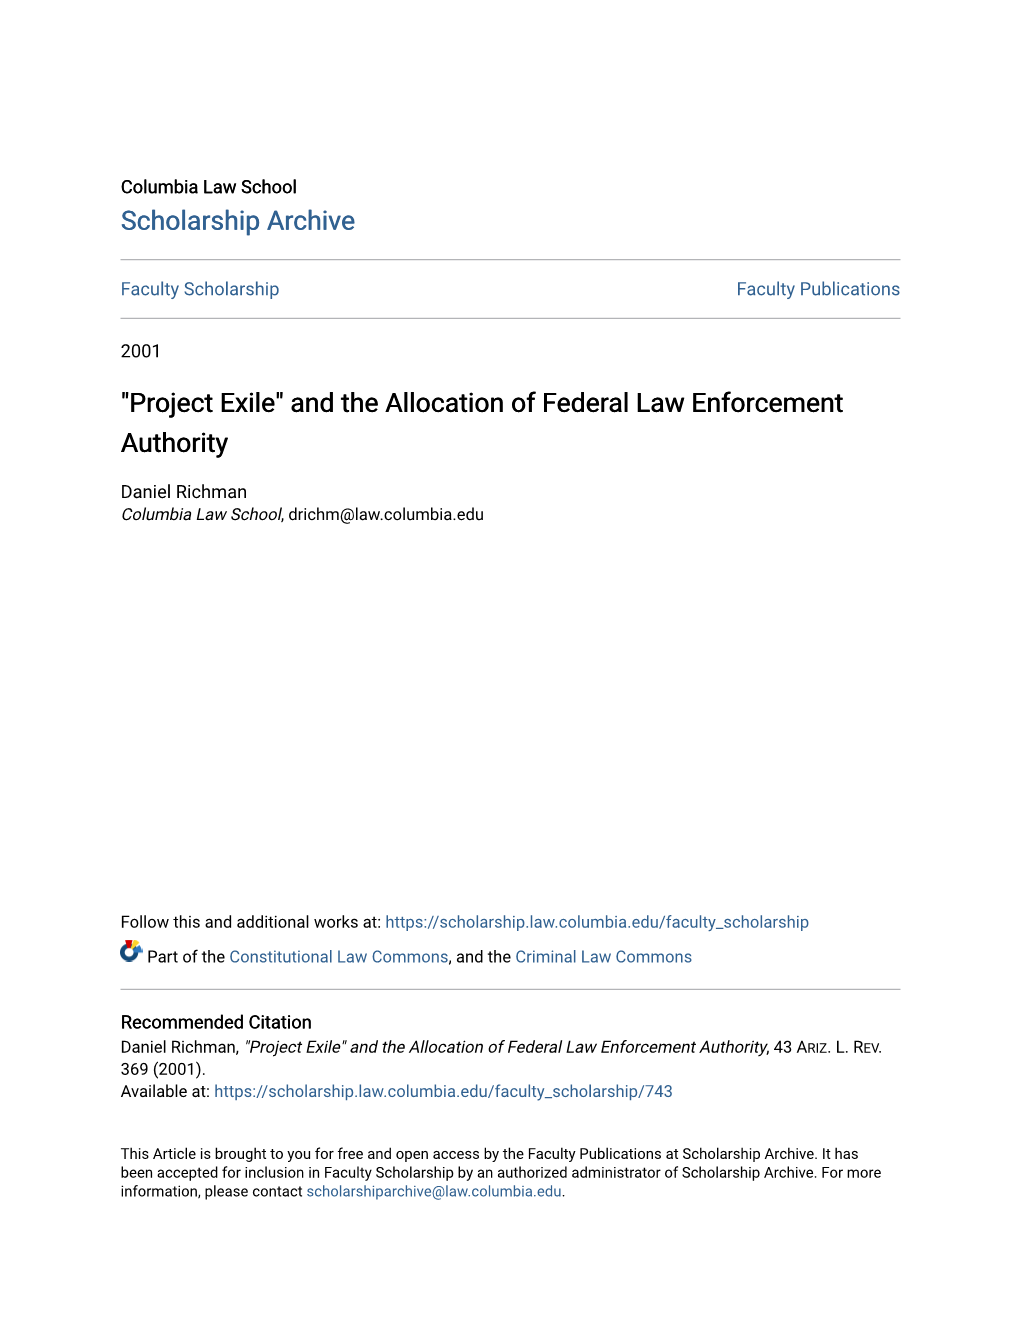 "Project Exile" and the Allocation of Federal Law Enforcement Authority